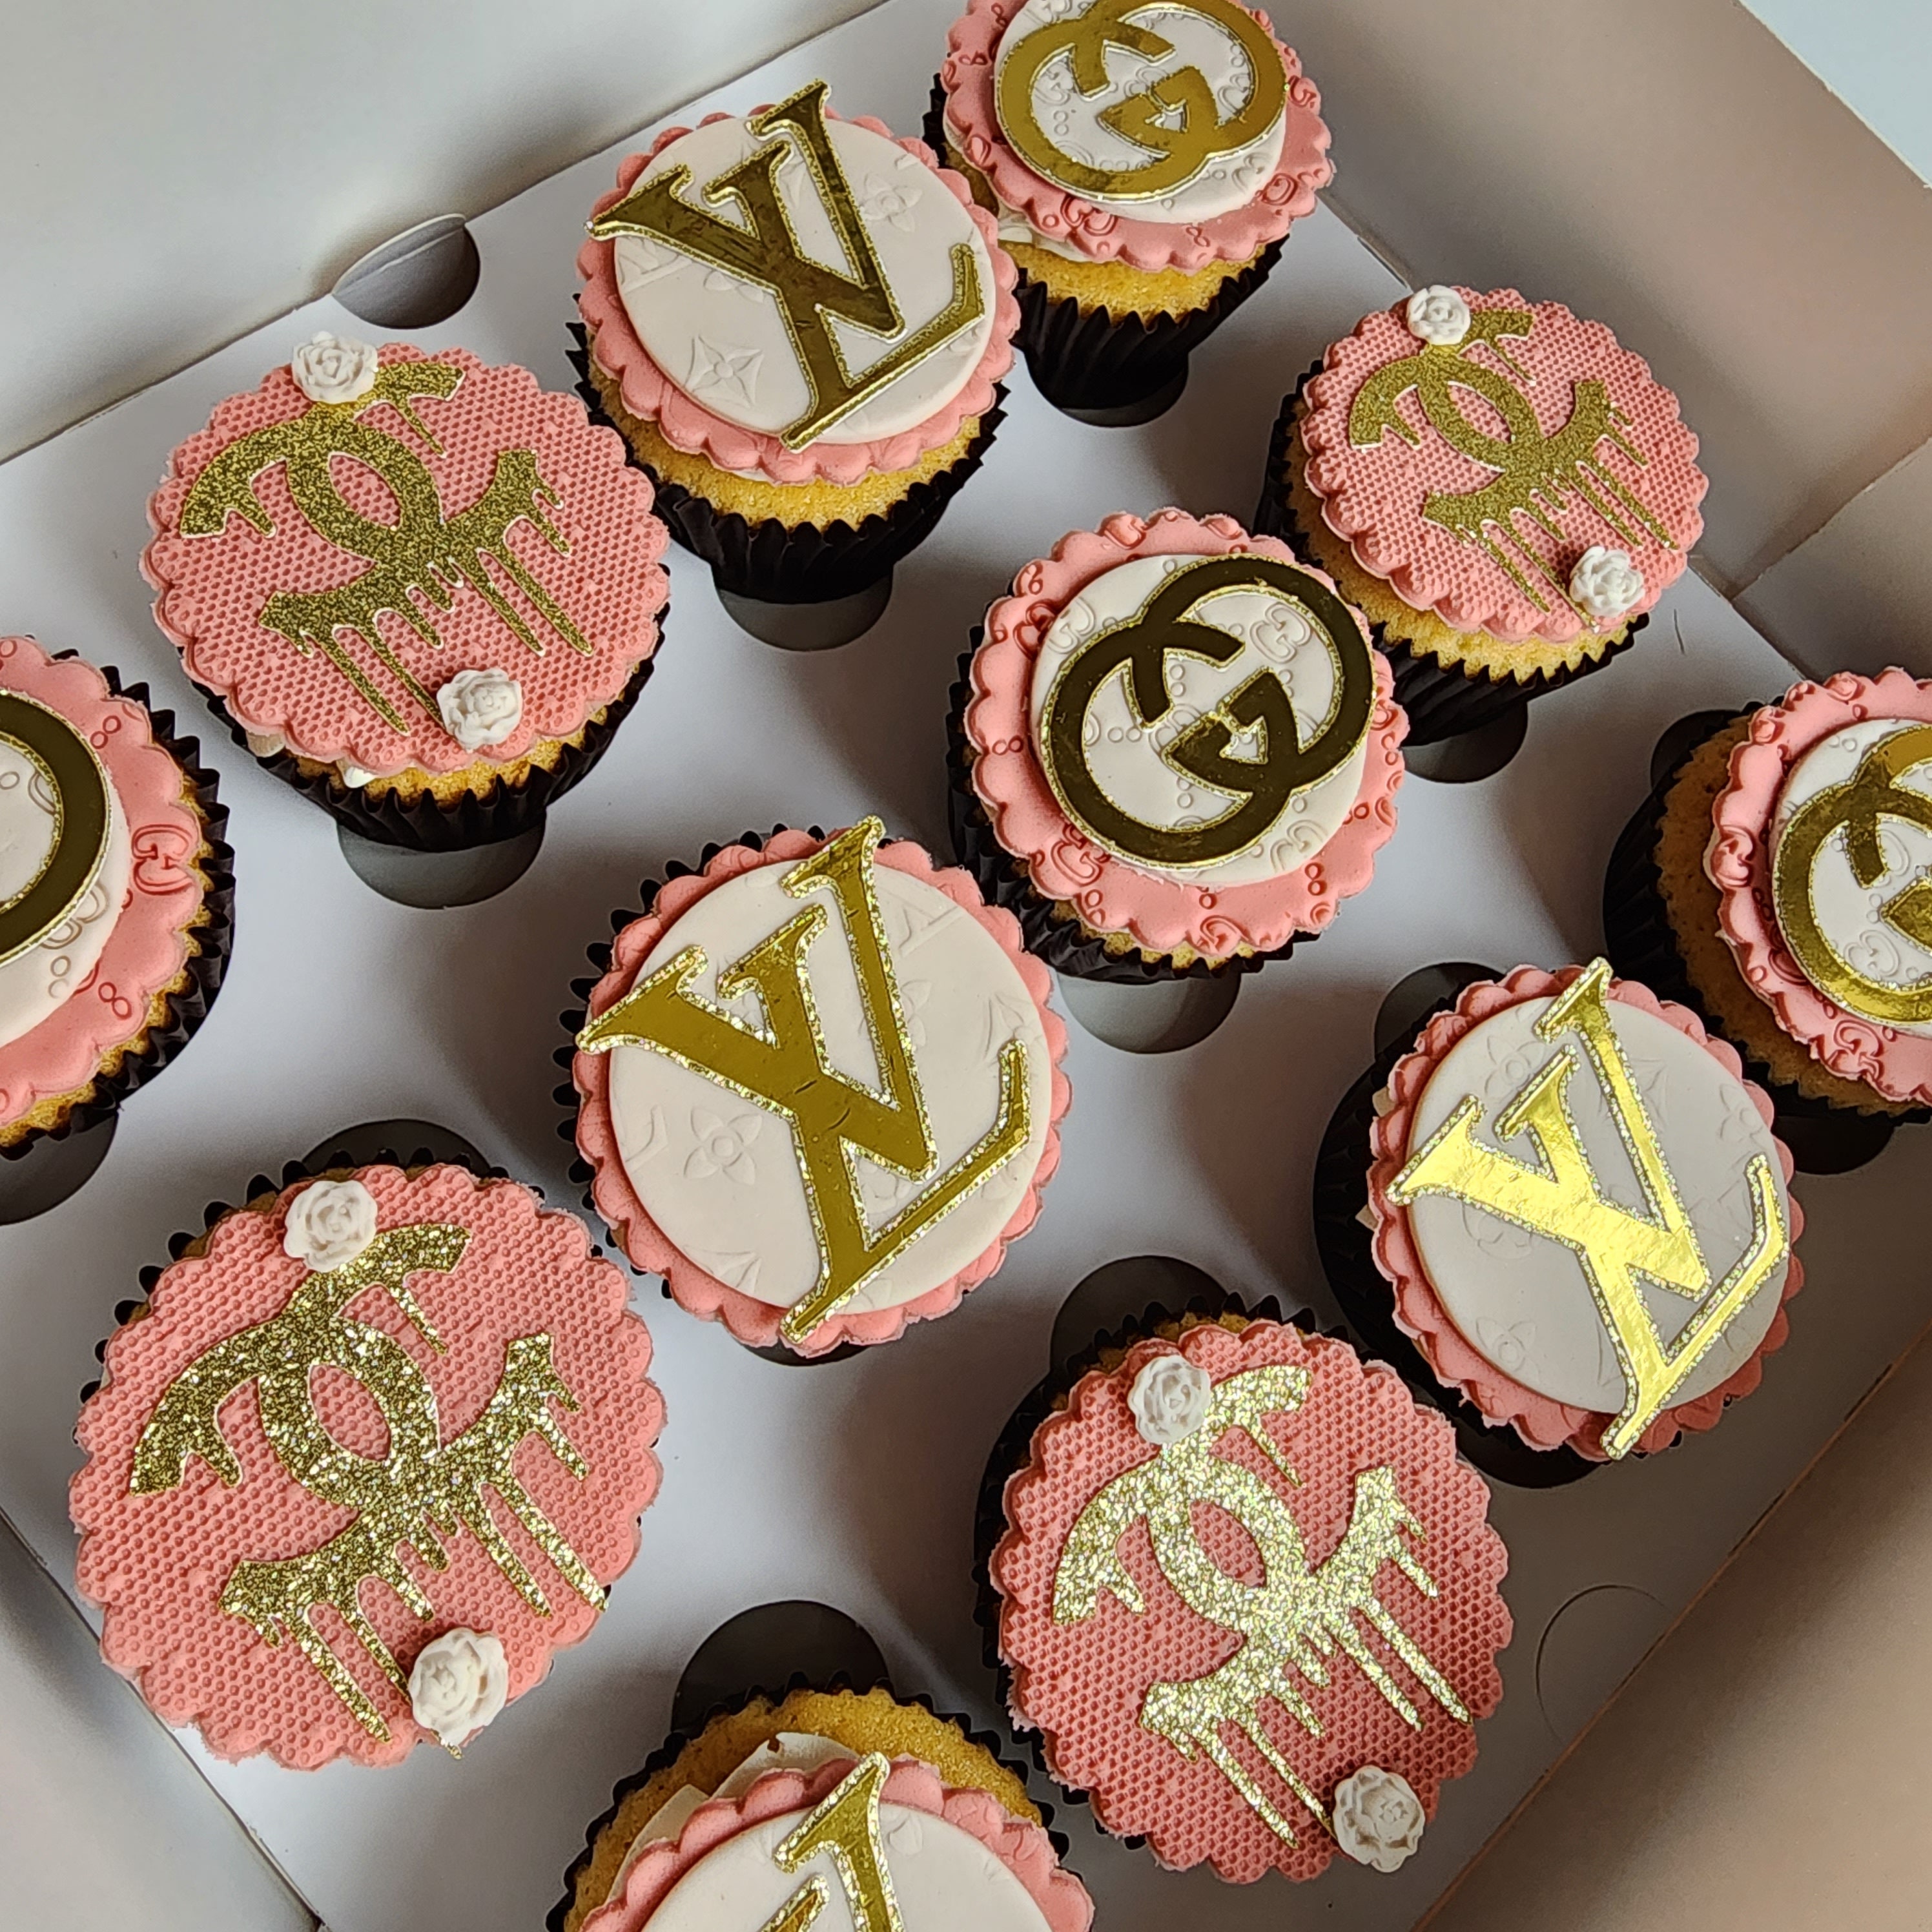 Louis Vuitton Black Tan Beige Wrap Edible Cake Toppers – Cakecery